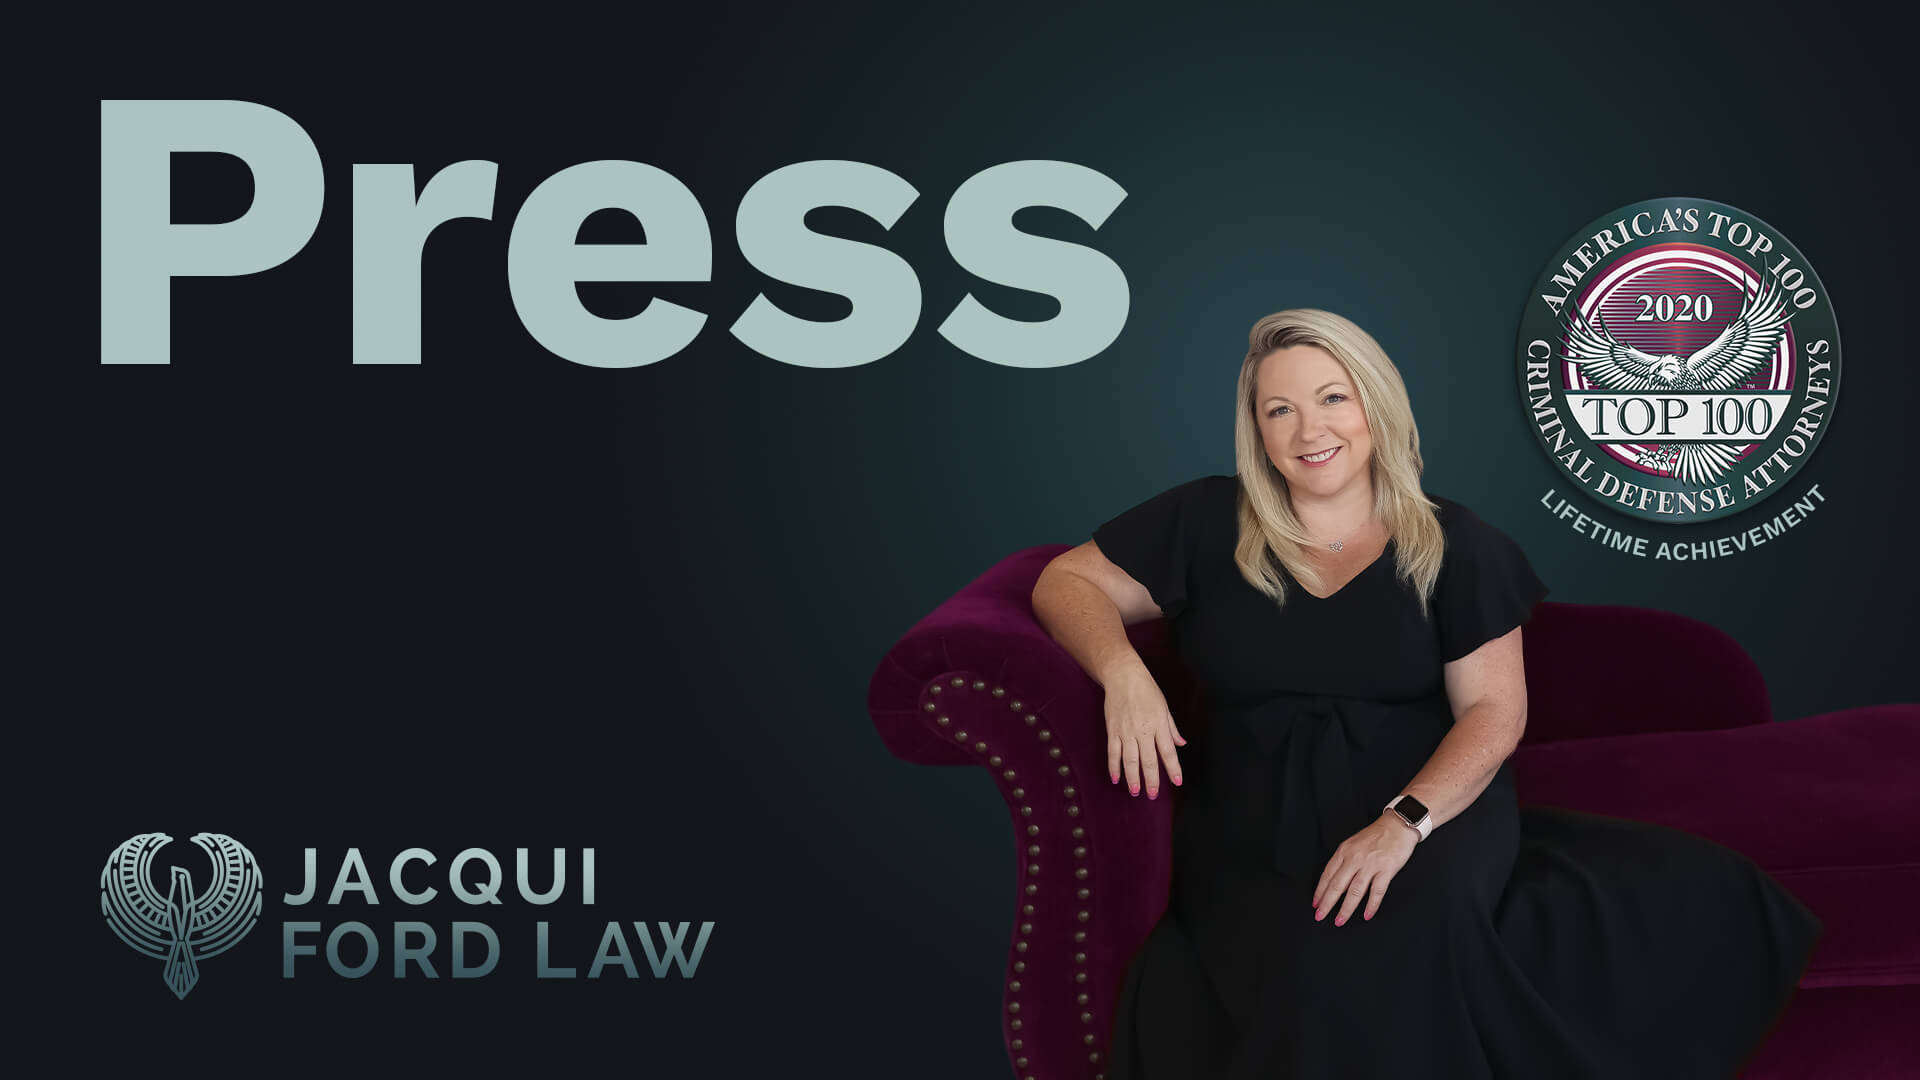 Jacqui-Ford-Law-Criminal-Defense-Lawyer-Oklahoma-City-Feat-img-Press